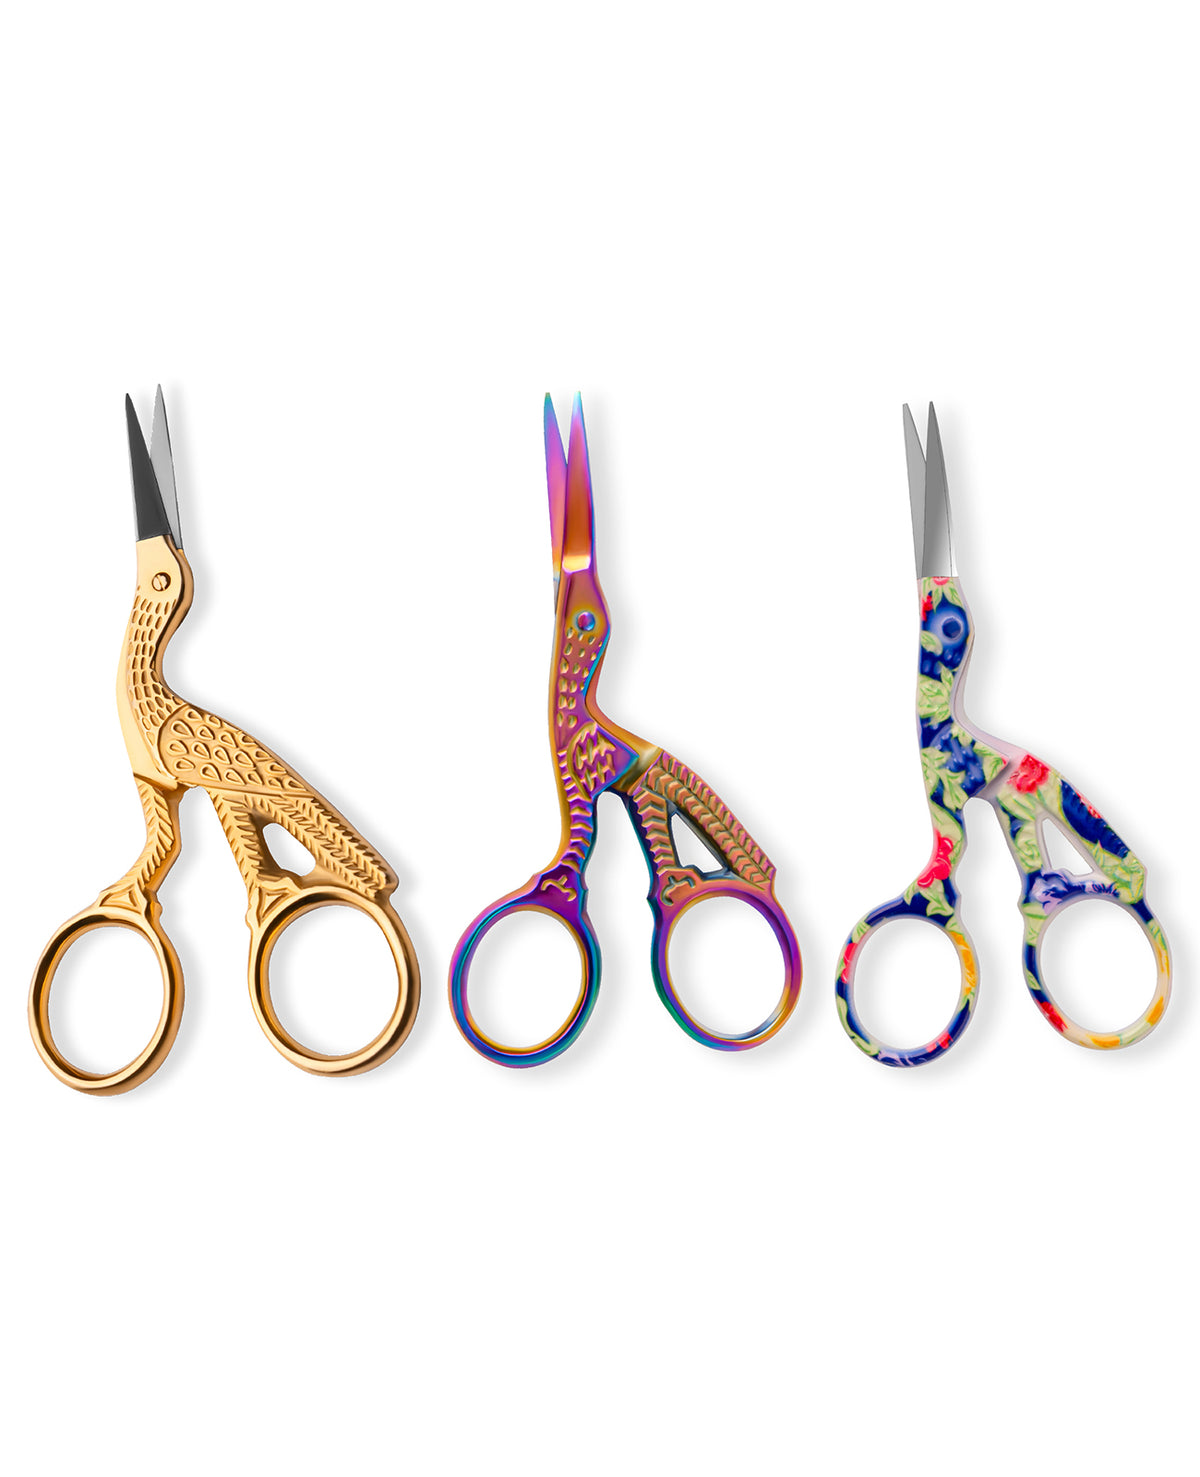 Embroidery scissor gold, rainbow, paper coated